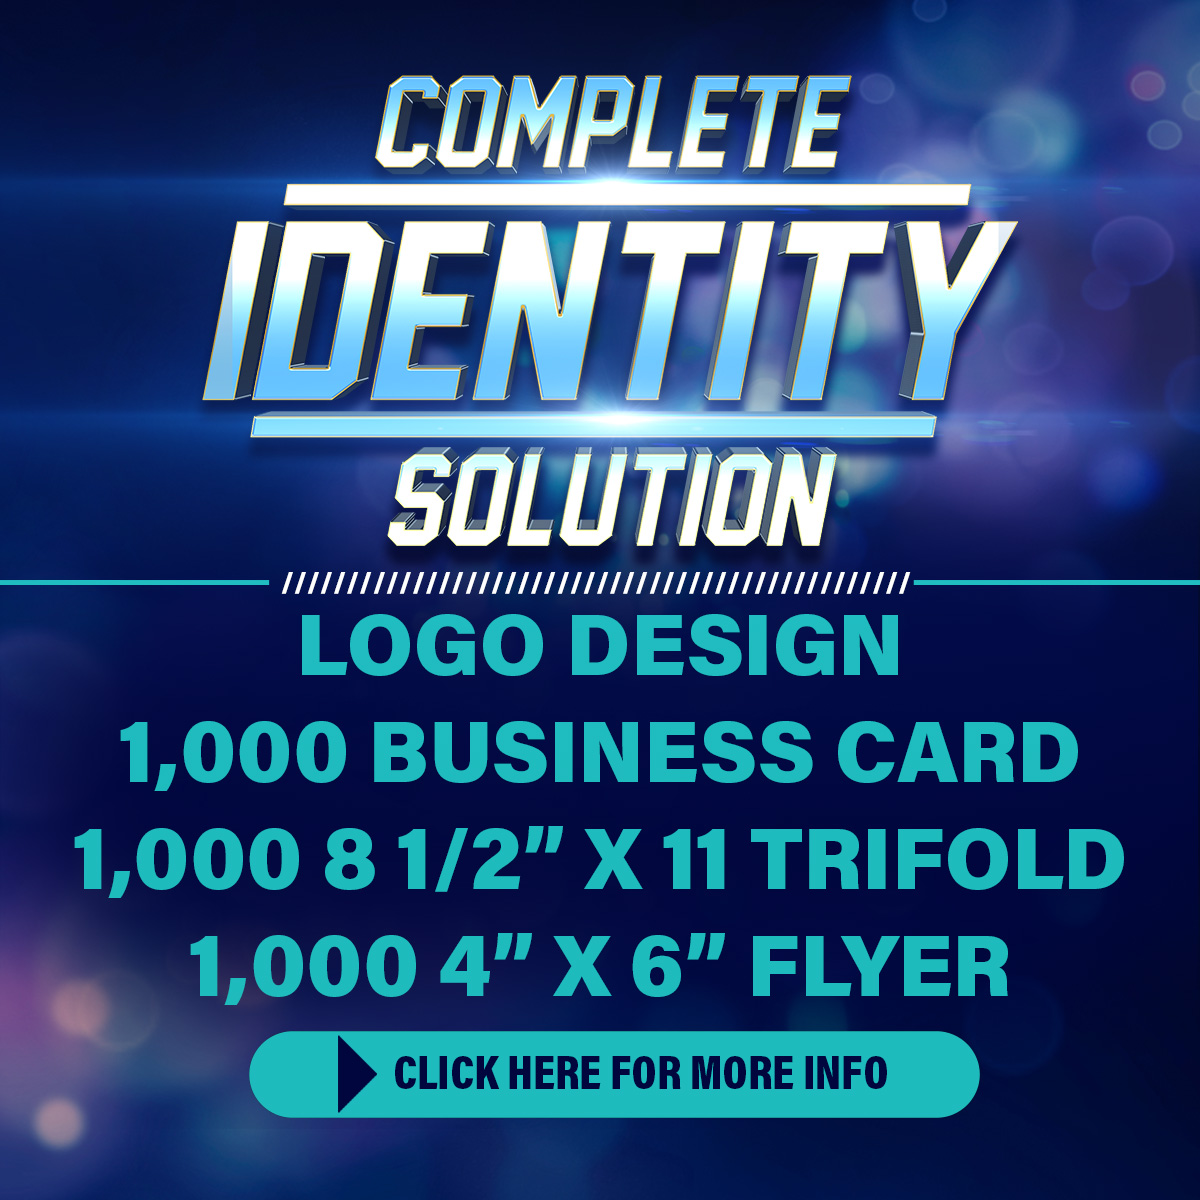 Complete Identity Solution